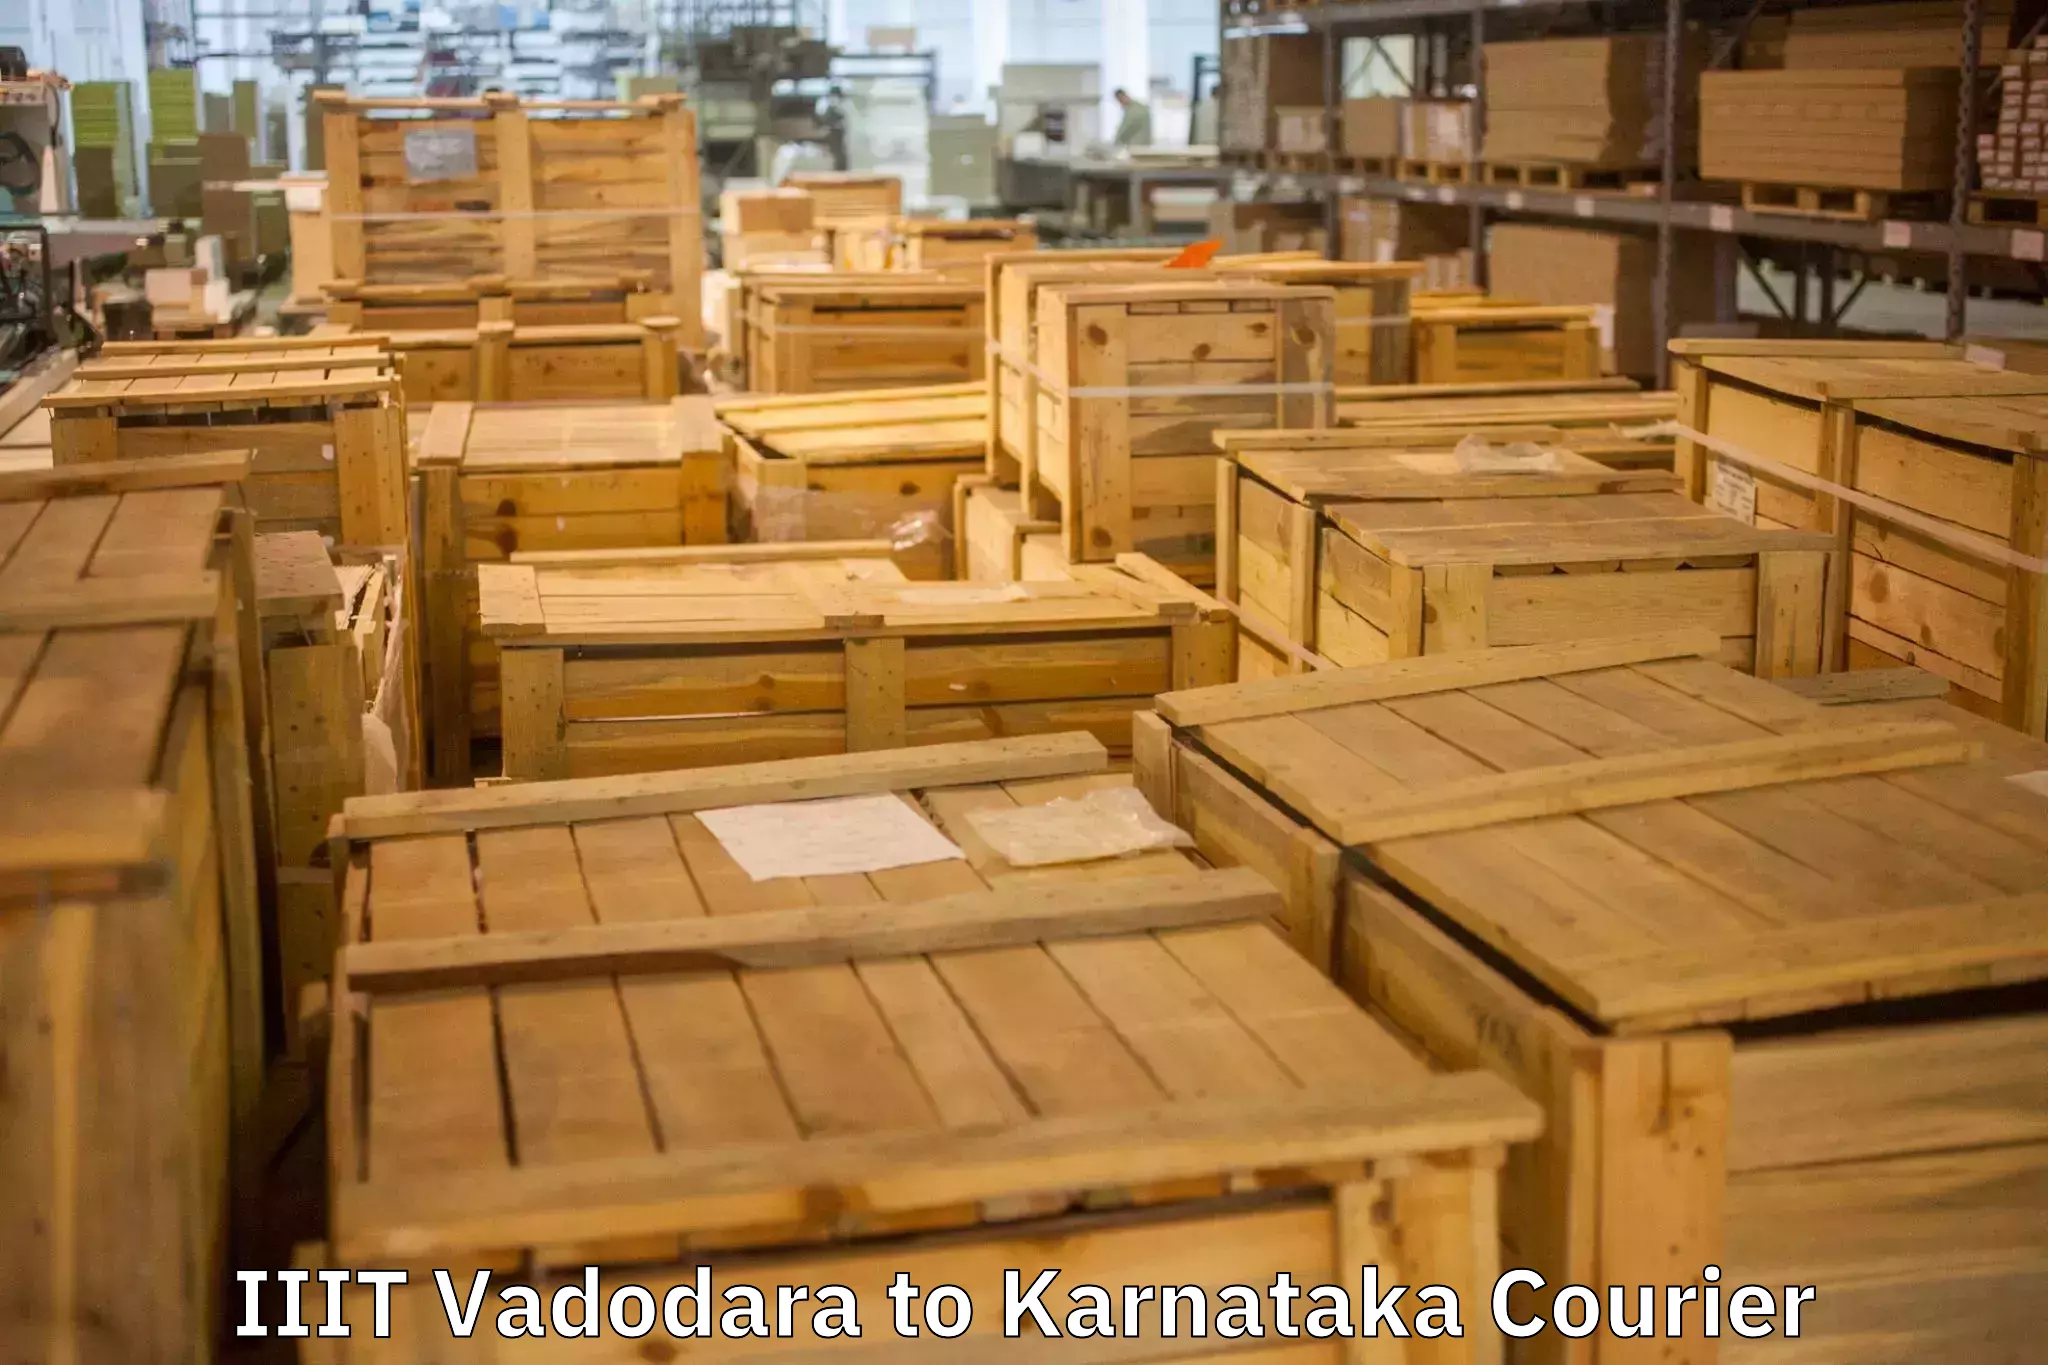 Specialized moving company IIIT Vadodara to Kollegal